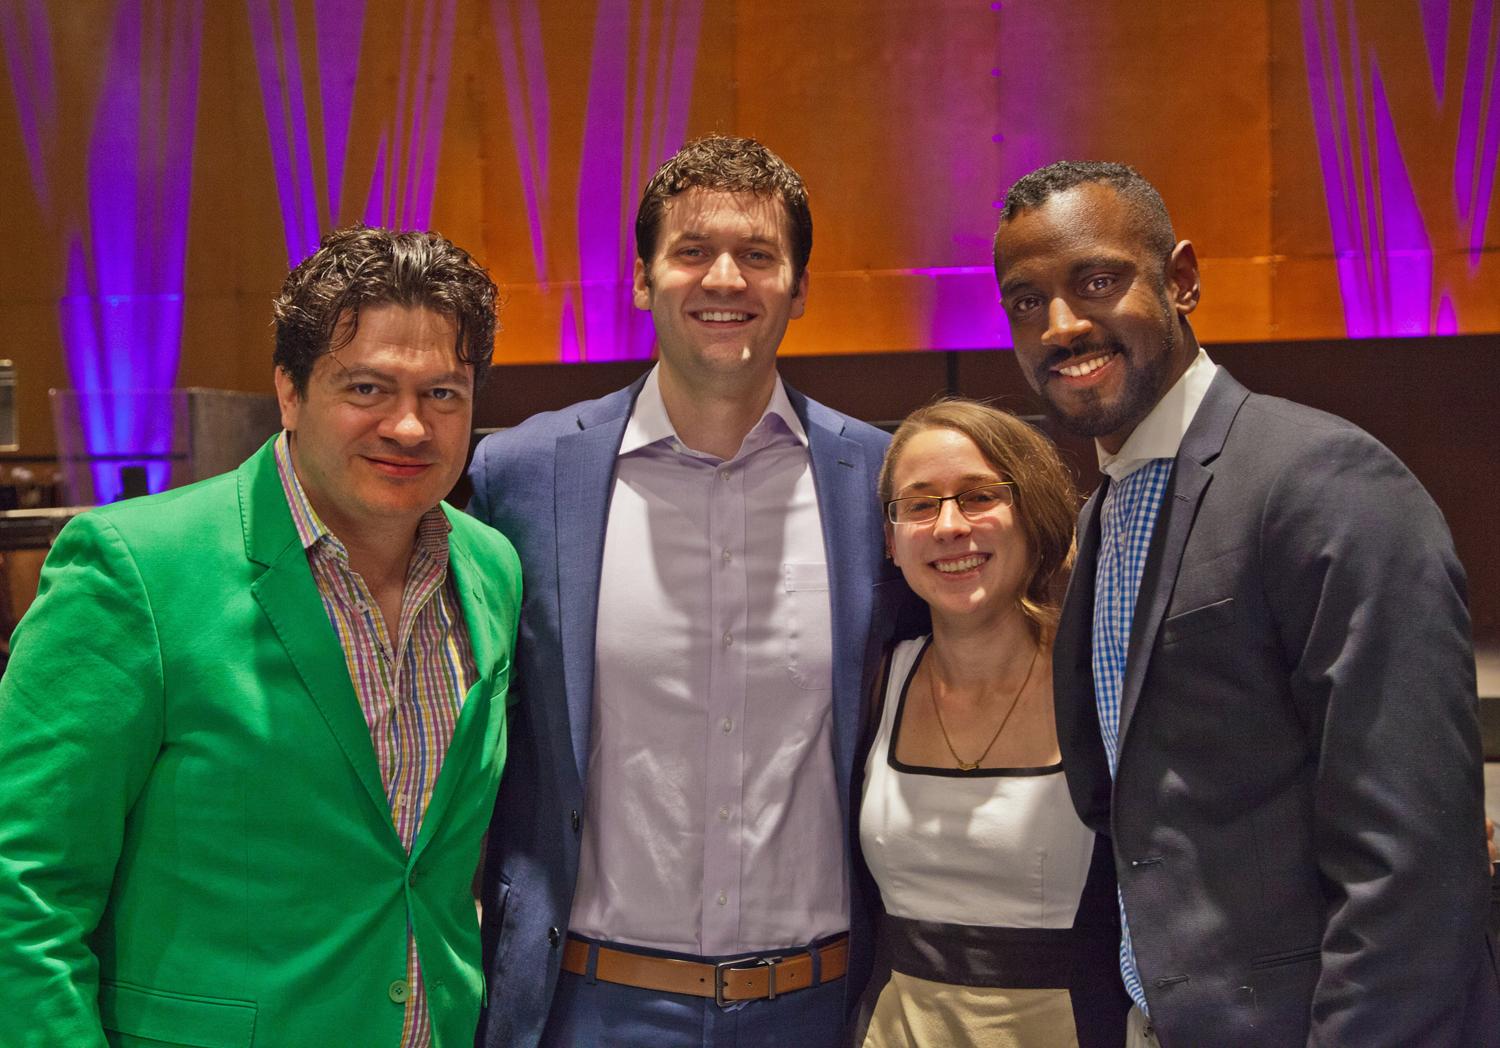 Cristi with Composers Workshop finalists (L-R): Charles Peck, Natalie Dietterich, and Carlos Simon.